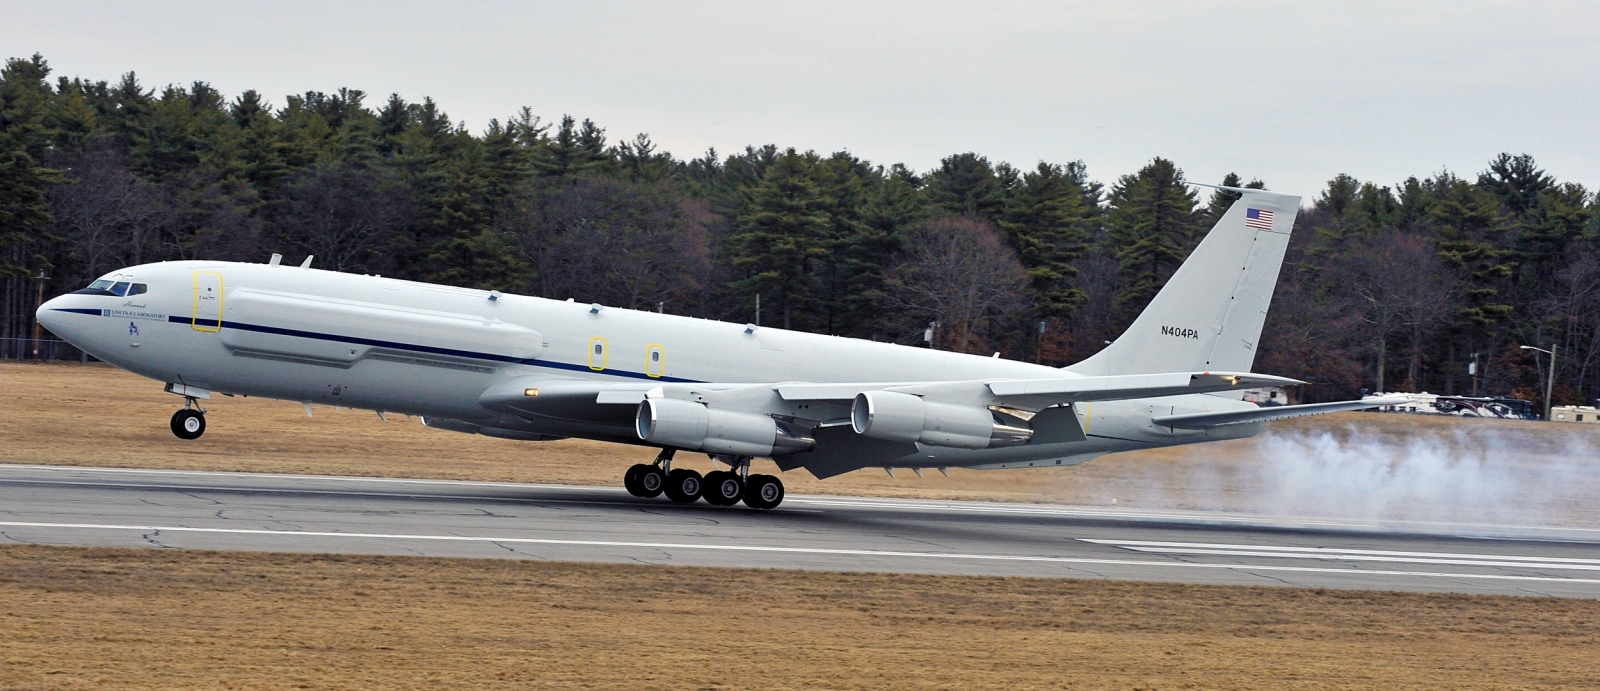 The refurbished Lincoln Laboratory Boeing 707 has been a mainstay of many important R&D programs since 1991.